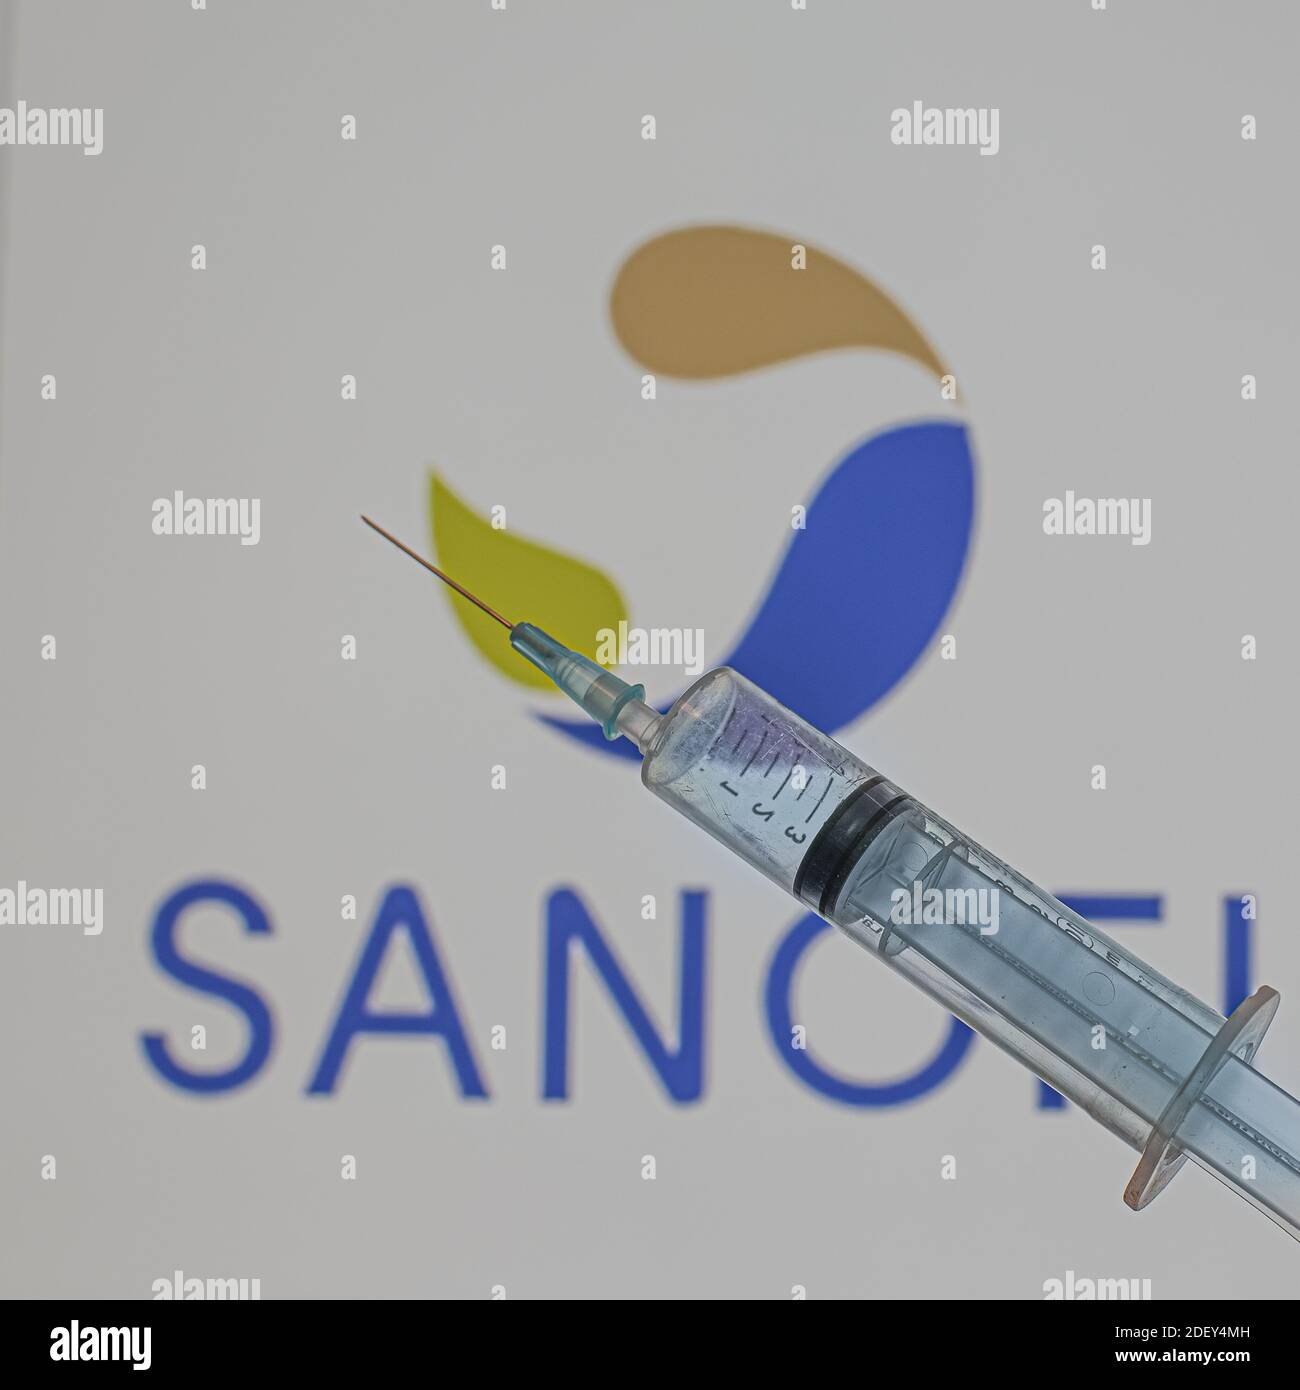 Sanofi S.A. is a multinational pharmaceutical company producing Covid-19 vaccine. A blue syringe in front of the logo, Denmark, December 2, 2020 Stock Photo